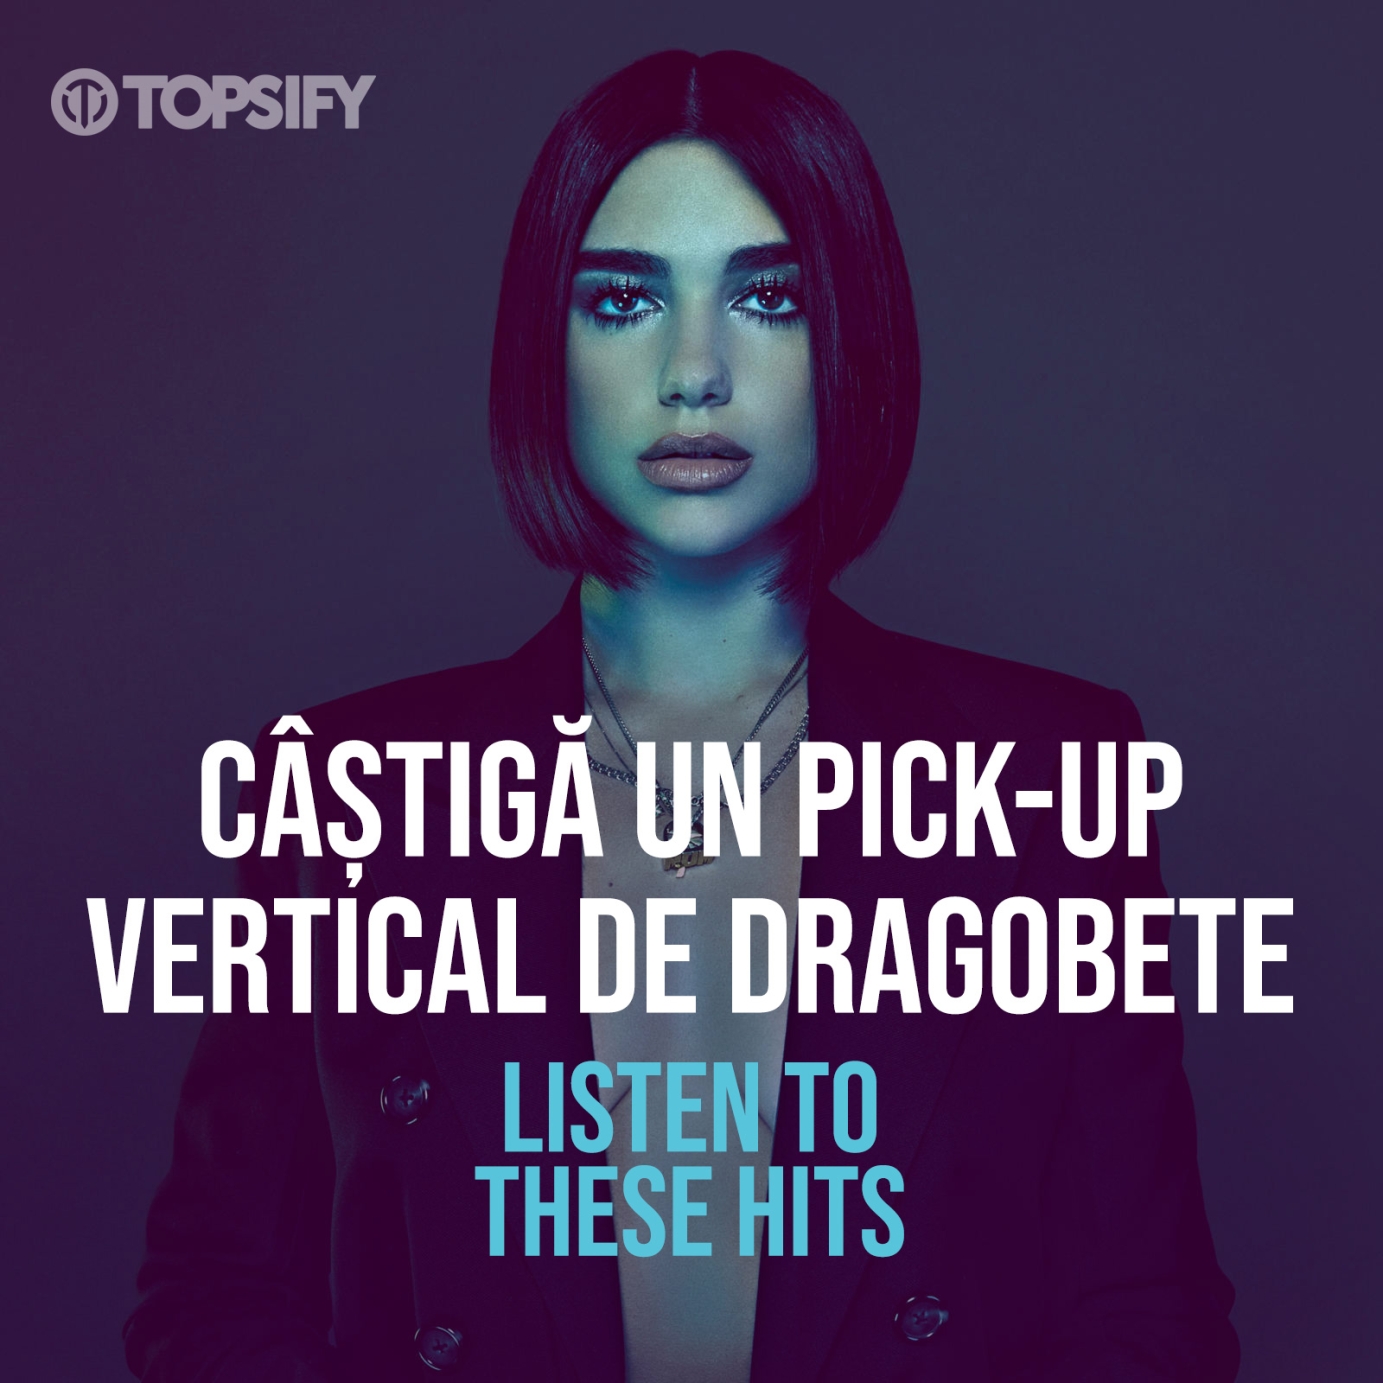 Topsify Romania "Listen to These Hits" Spotify Campaign